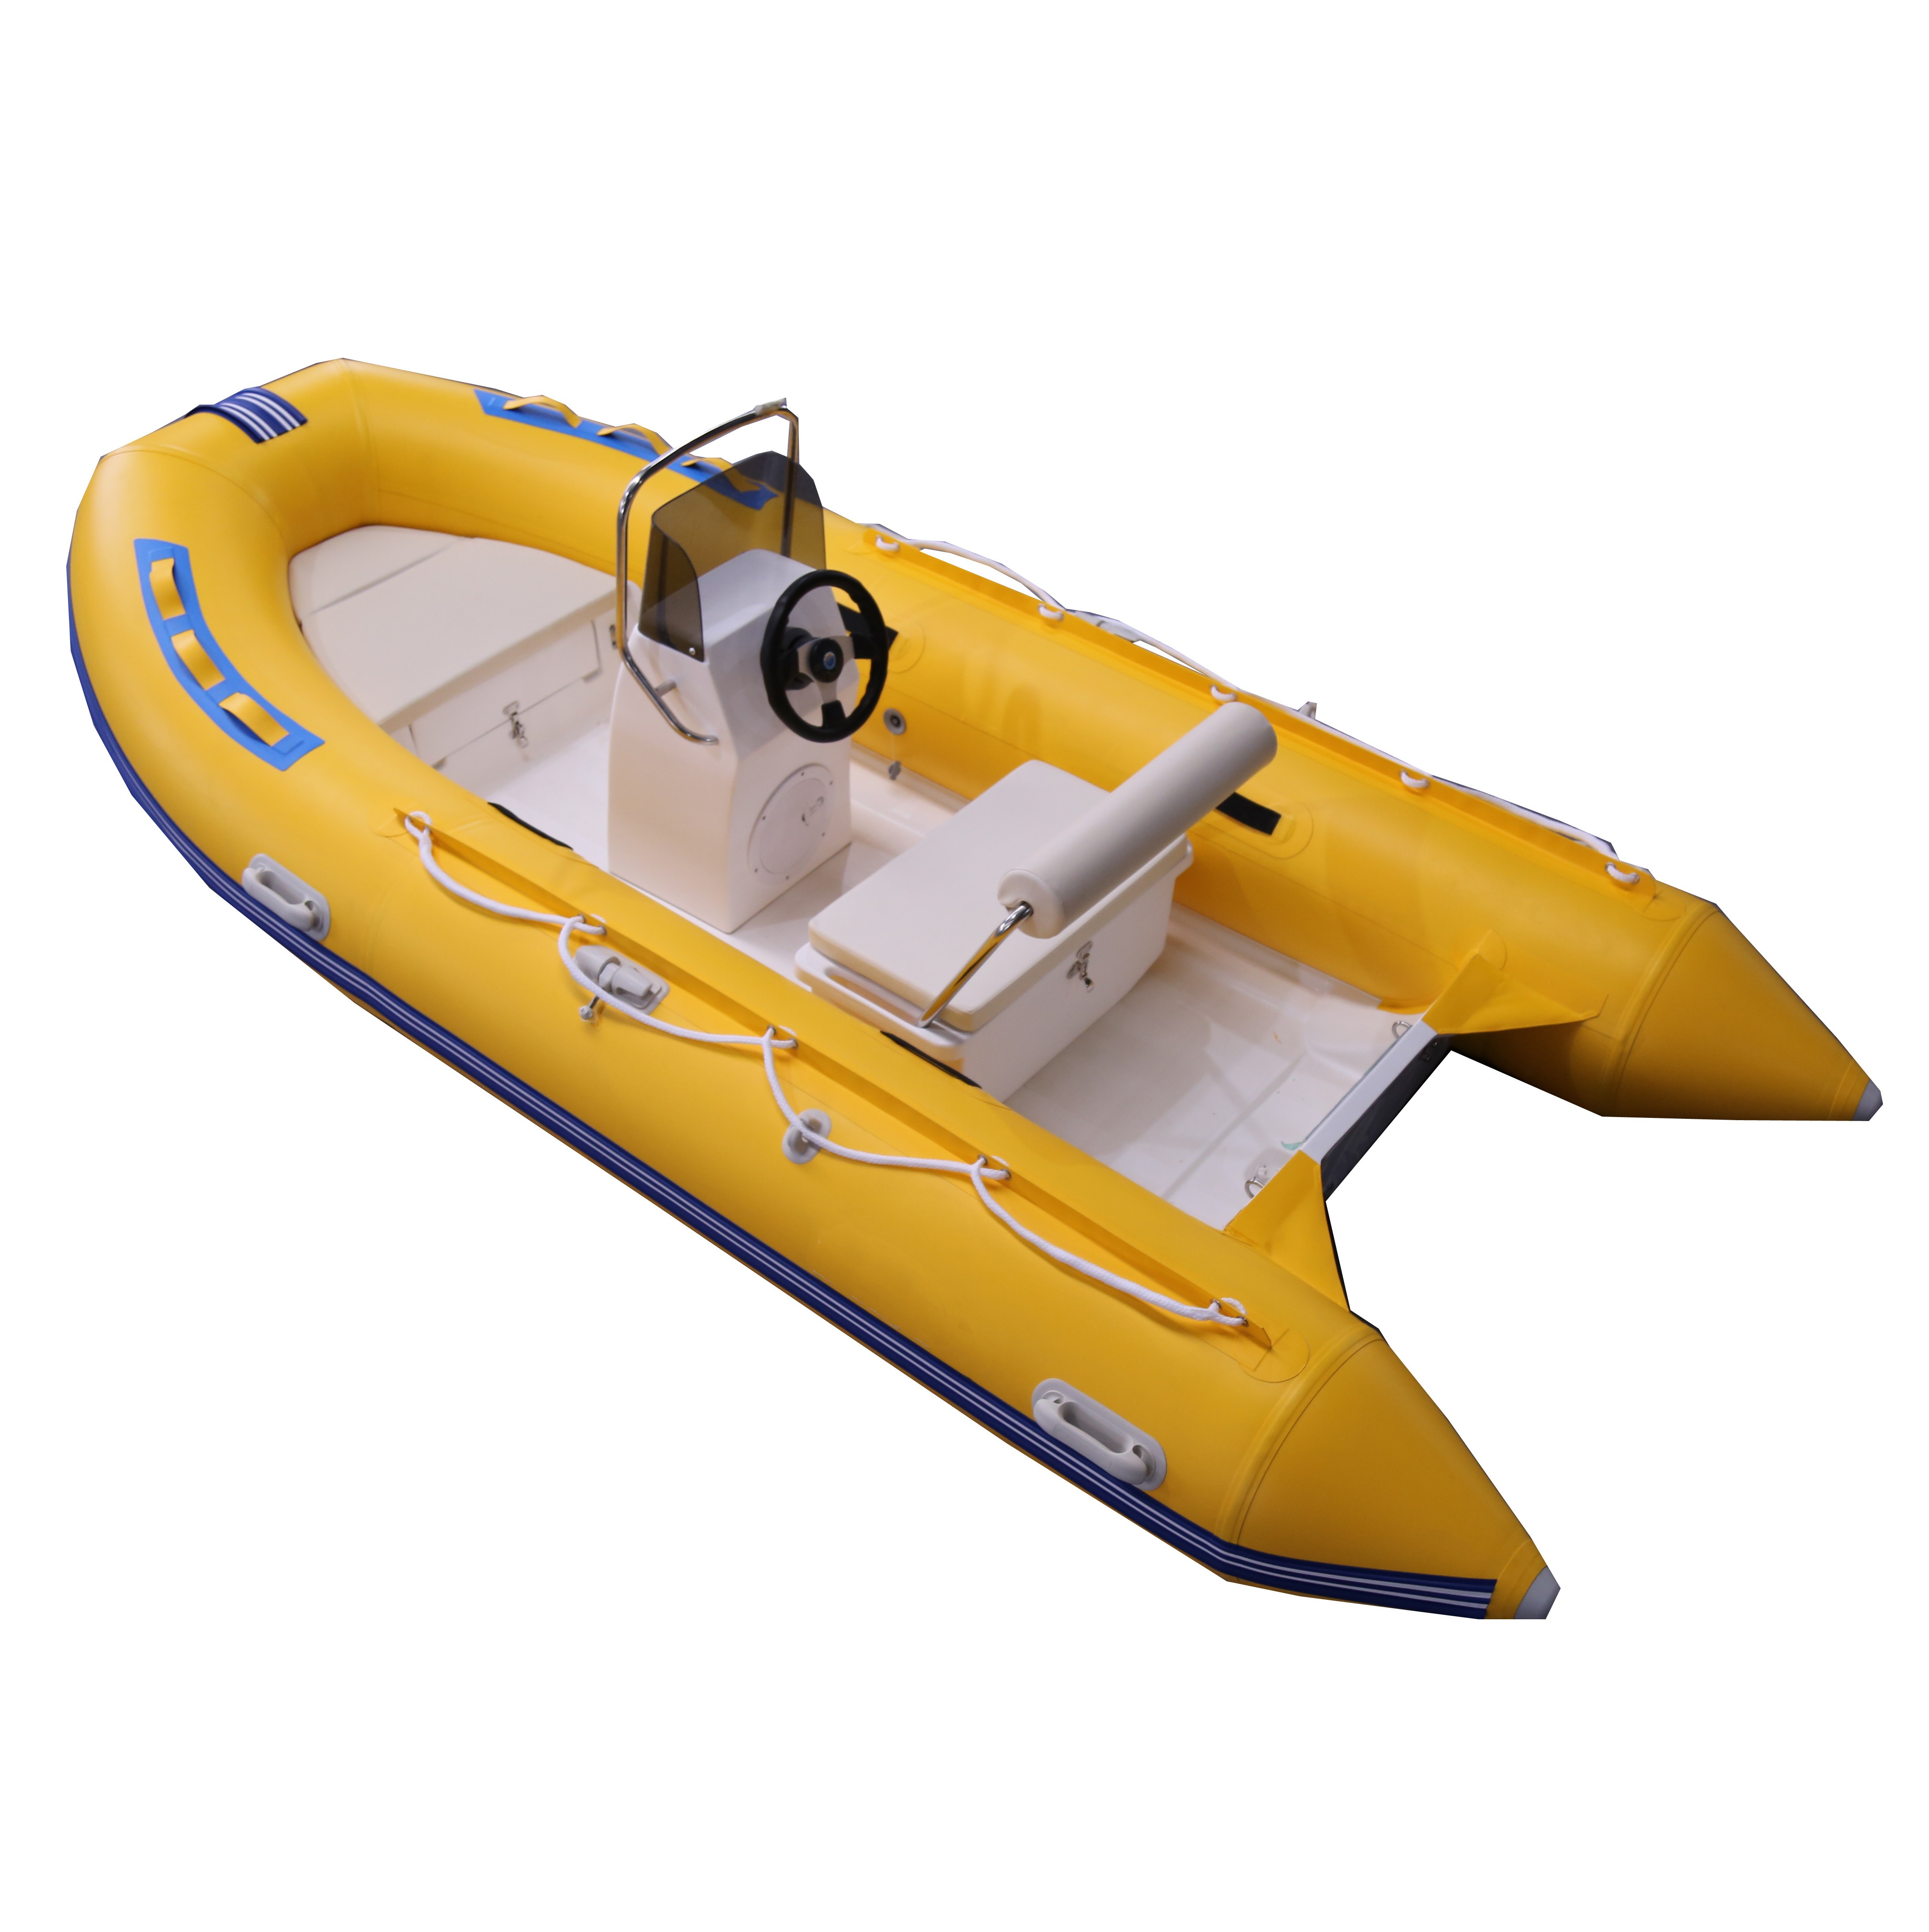 Fibreglass tender boats and 10 ft achilles inflatable boat for sale